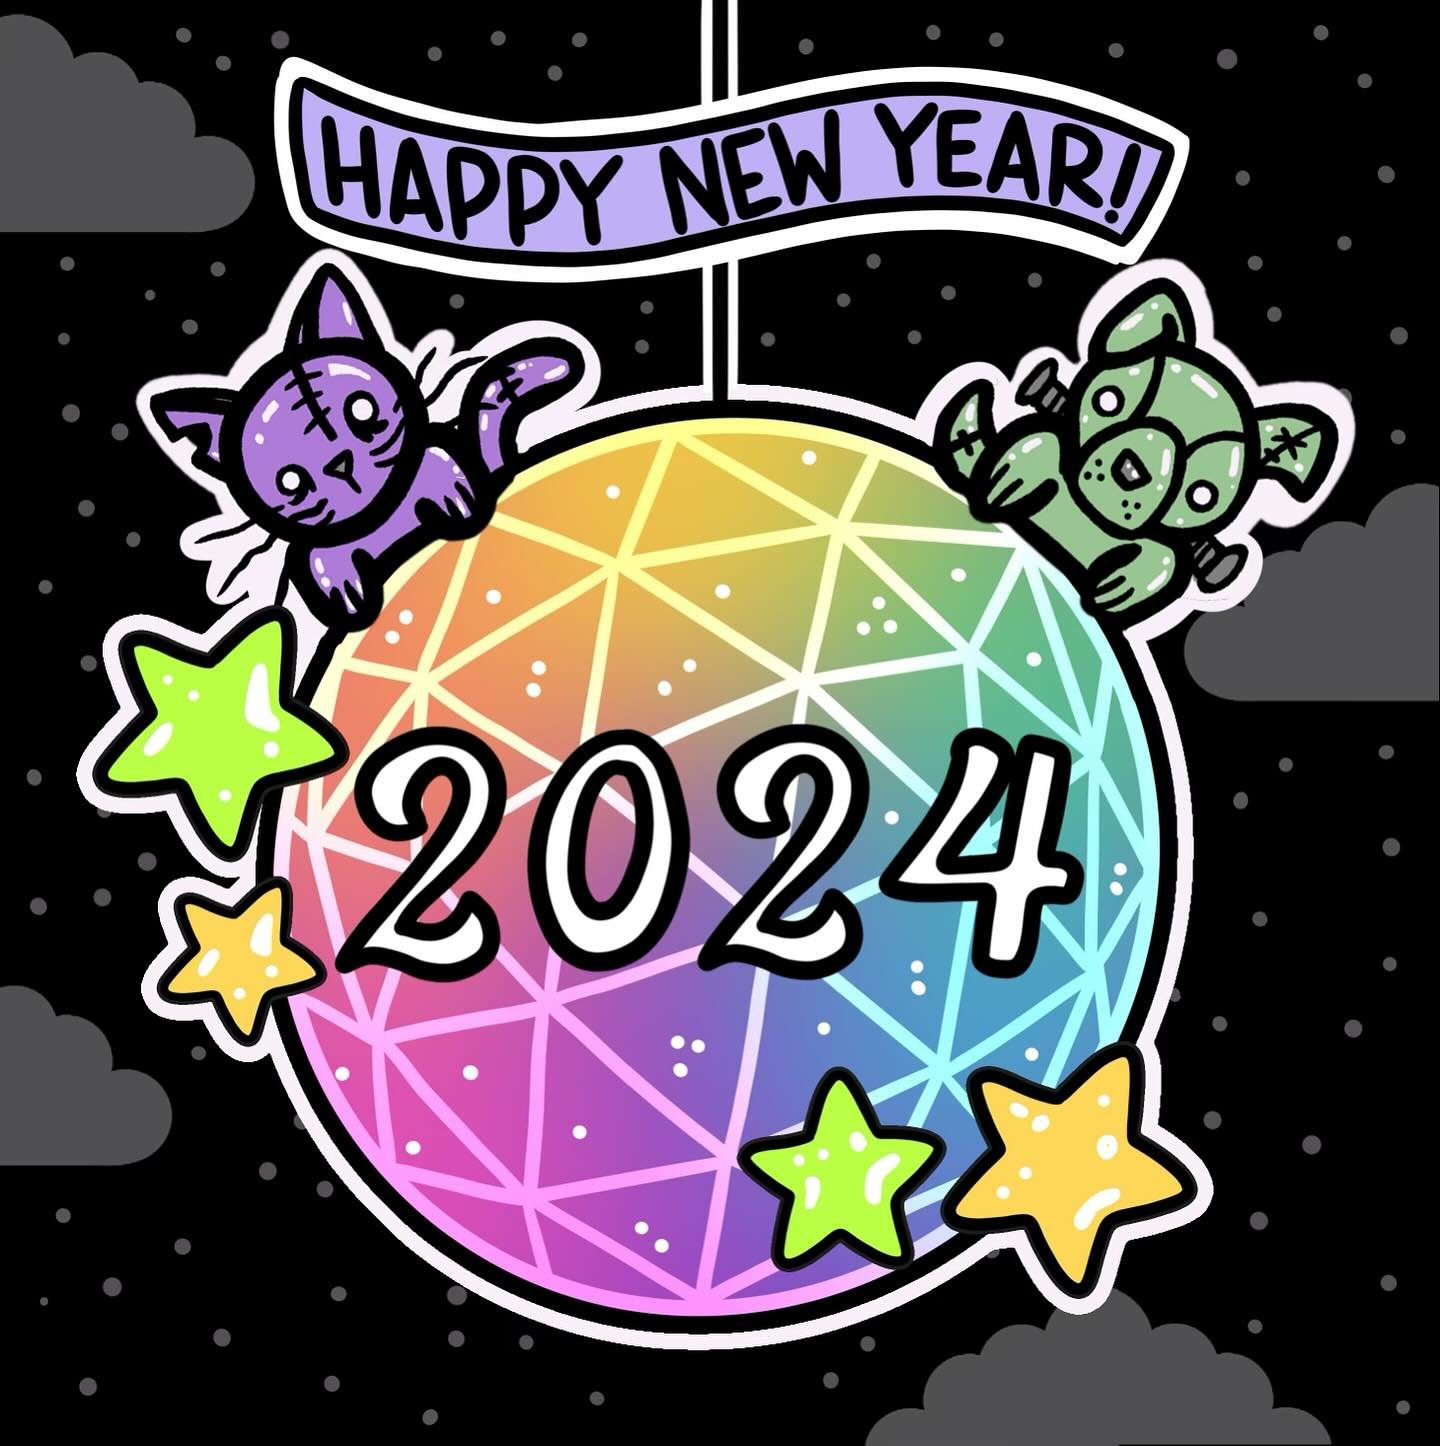 Our new year&rsquo;s resolution is to pet more dogs and cats, DUH! Maybe even some other kinds of animals, too! Drop a 🪩 if you support this! #nightofthelivingpets
.
.
.
.
#happynewyear #welcome2024 #newyearsday #newyearsresolution #2024resolutions 